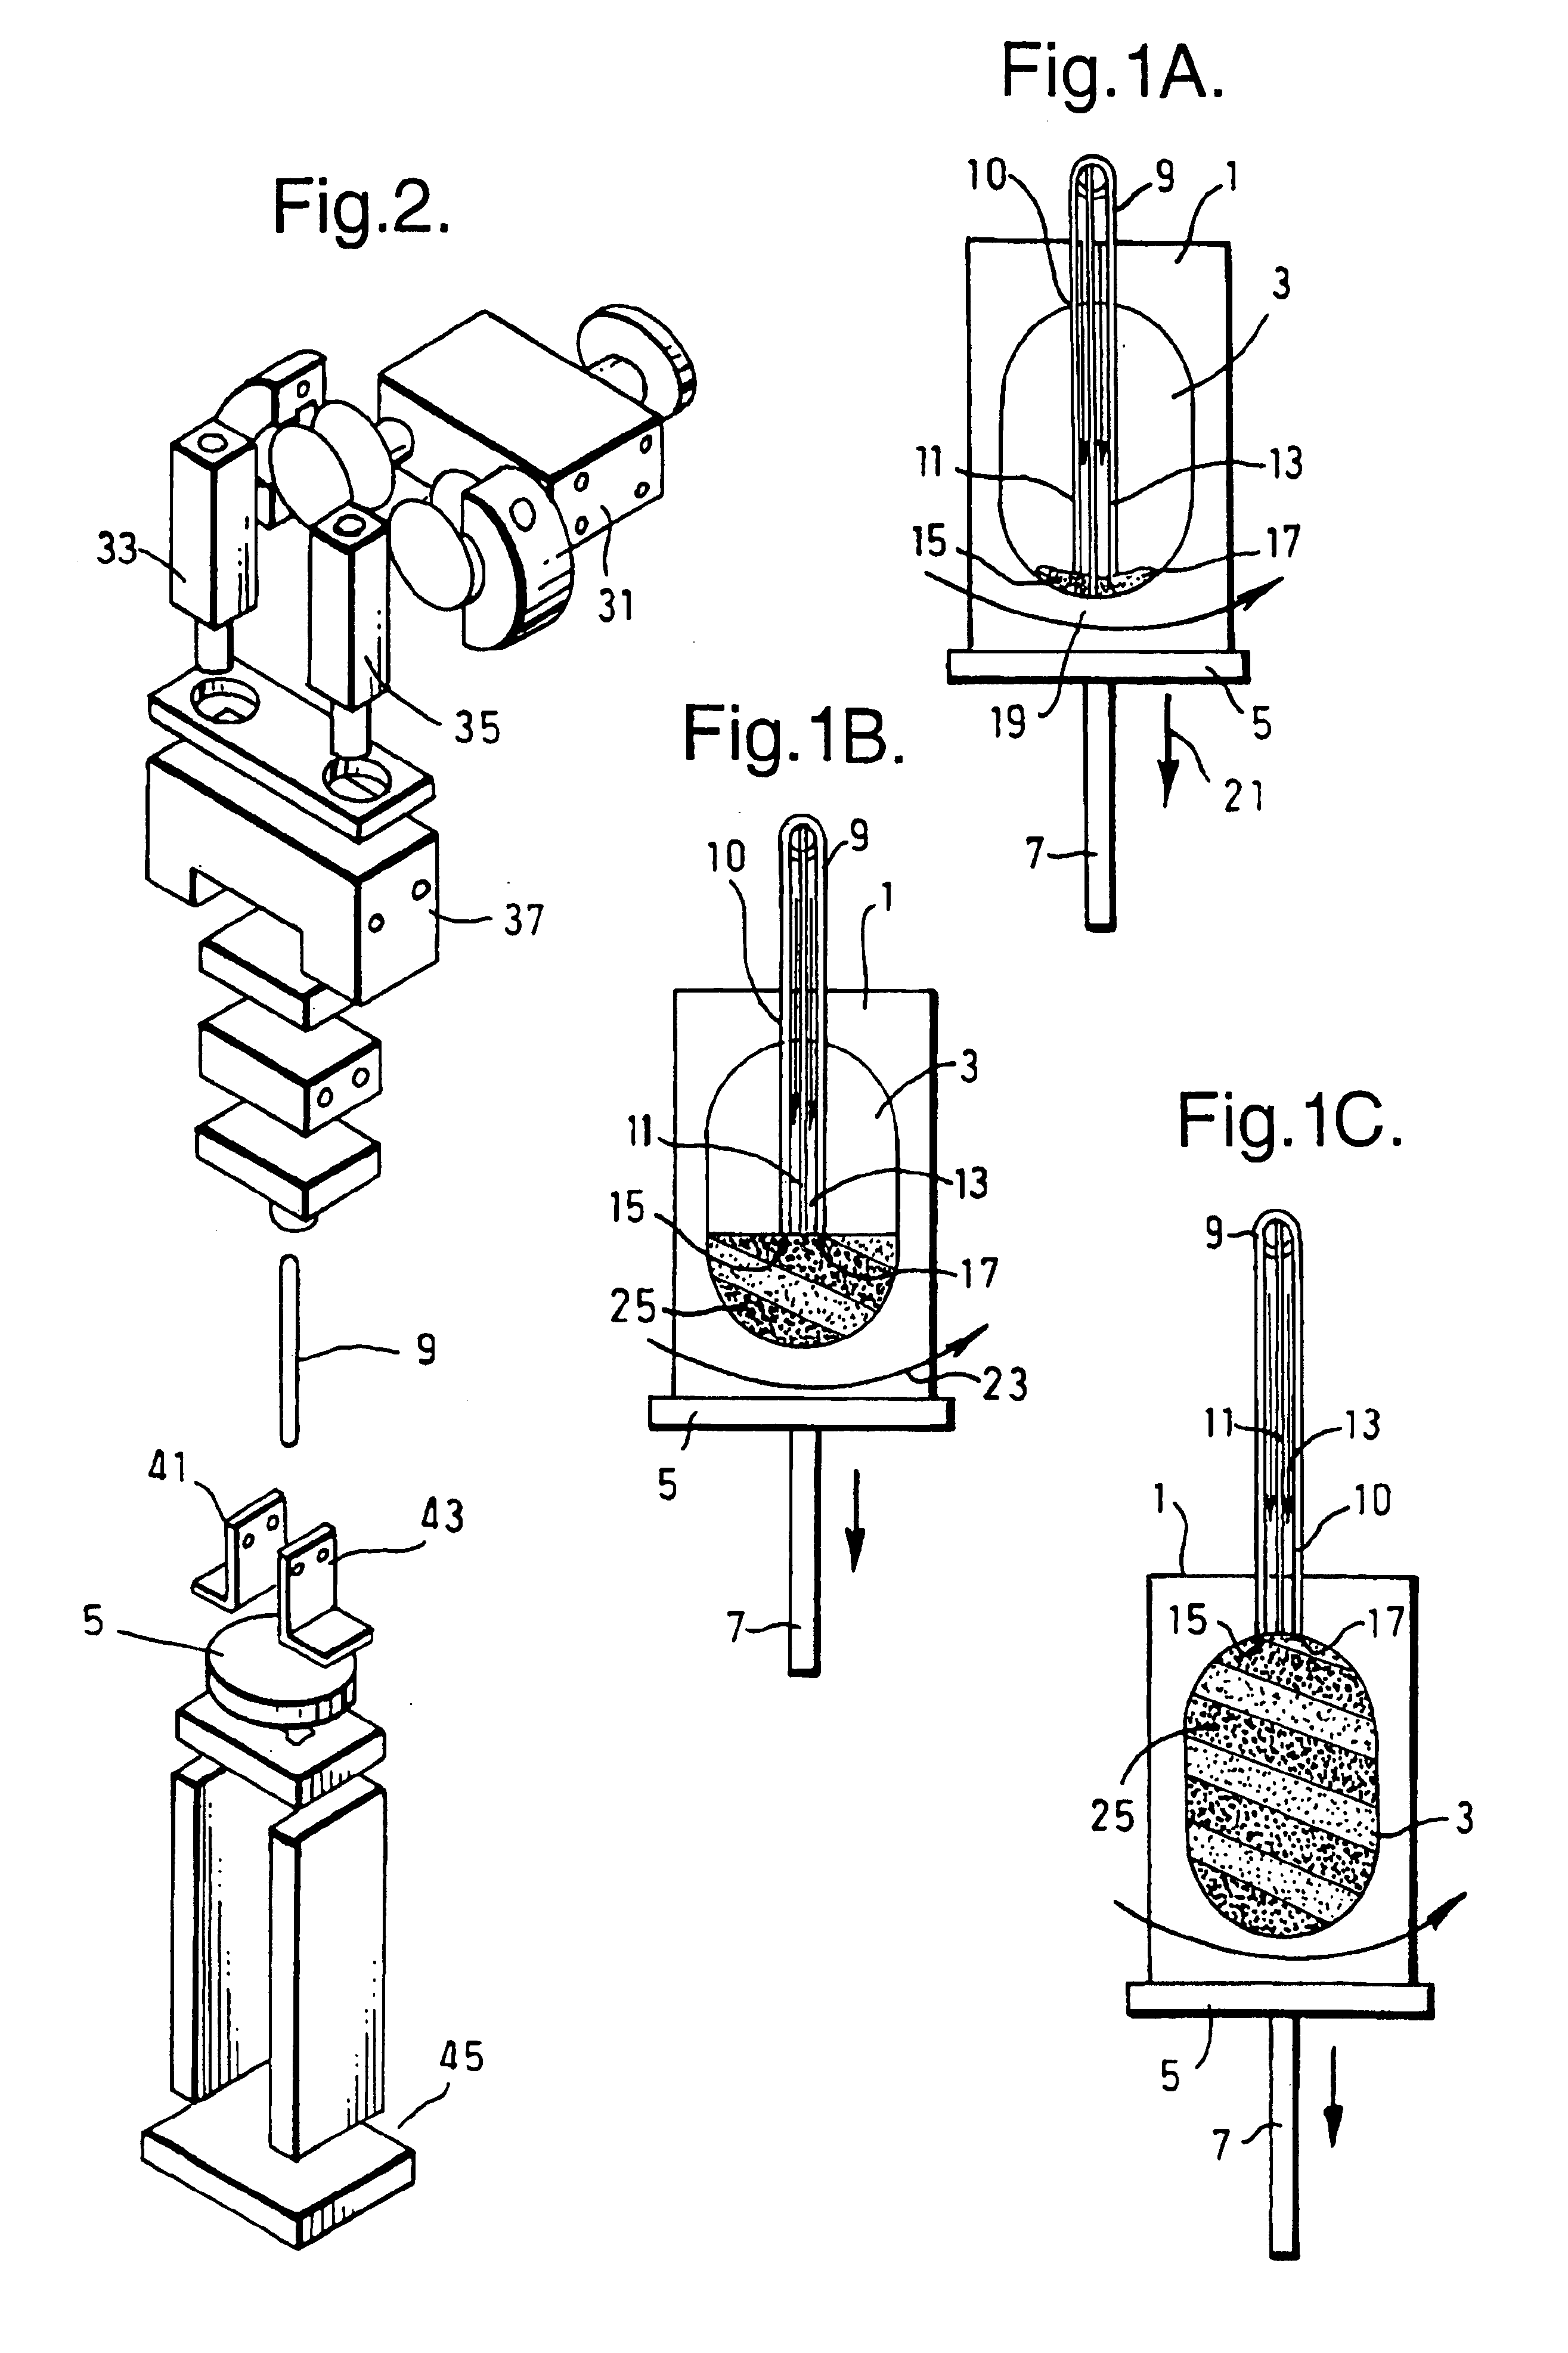 Process for the production of a detergent bar